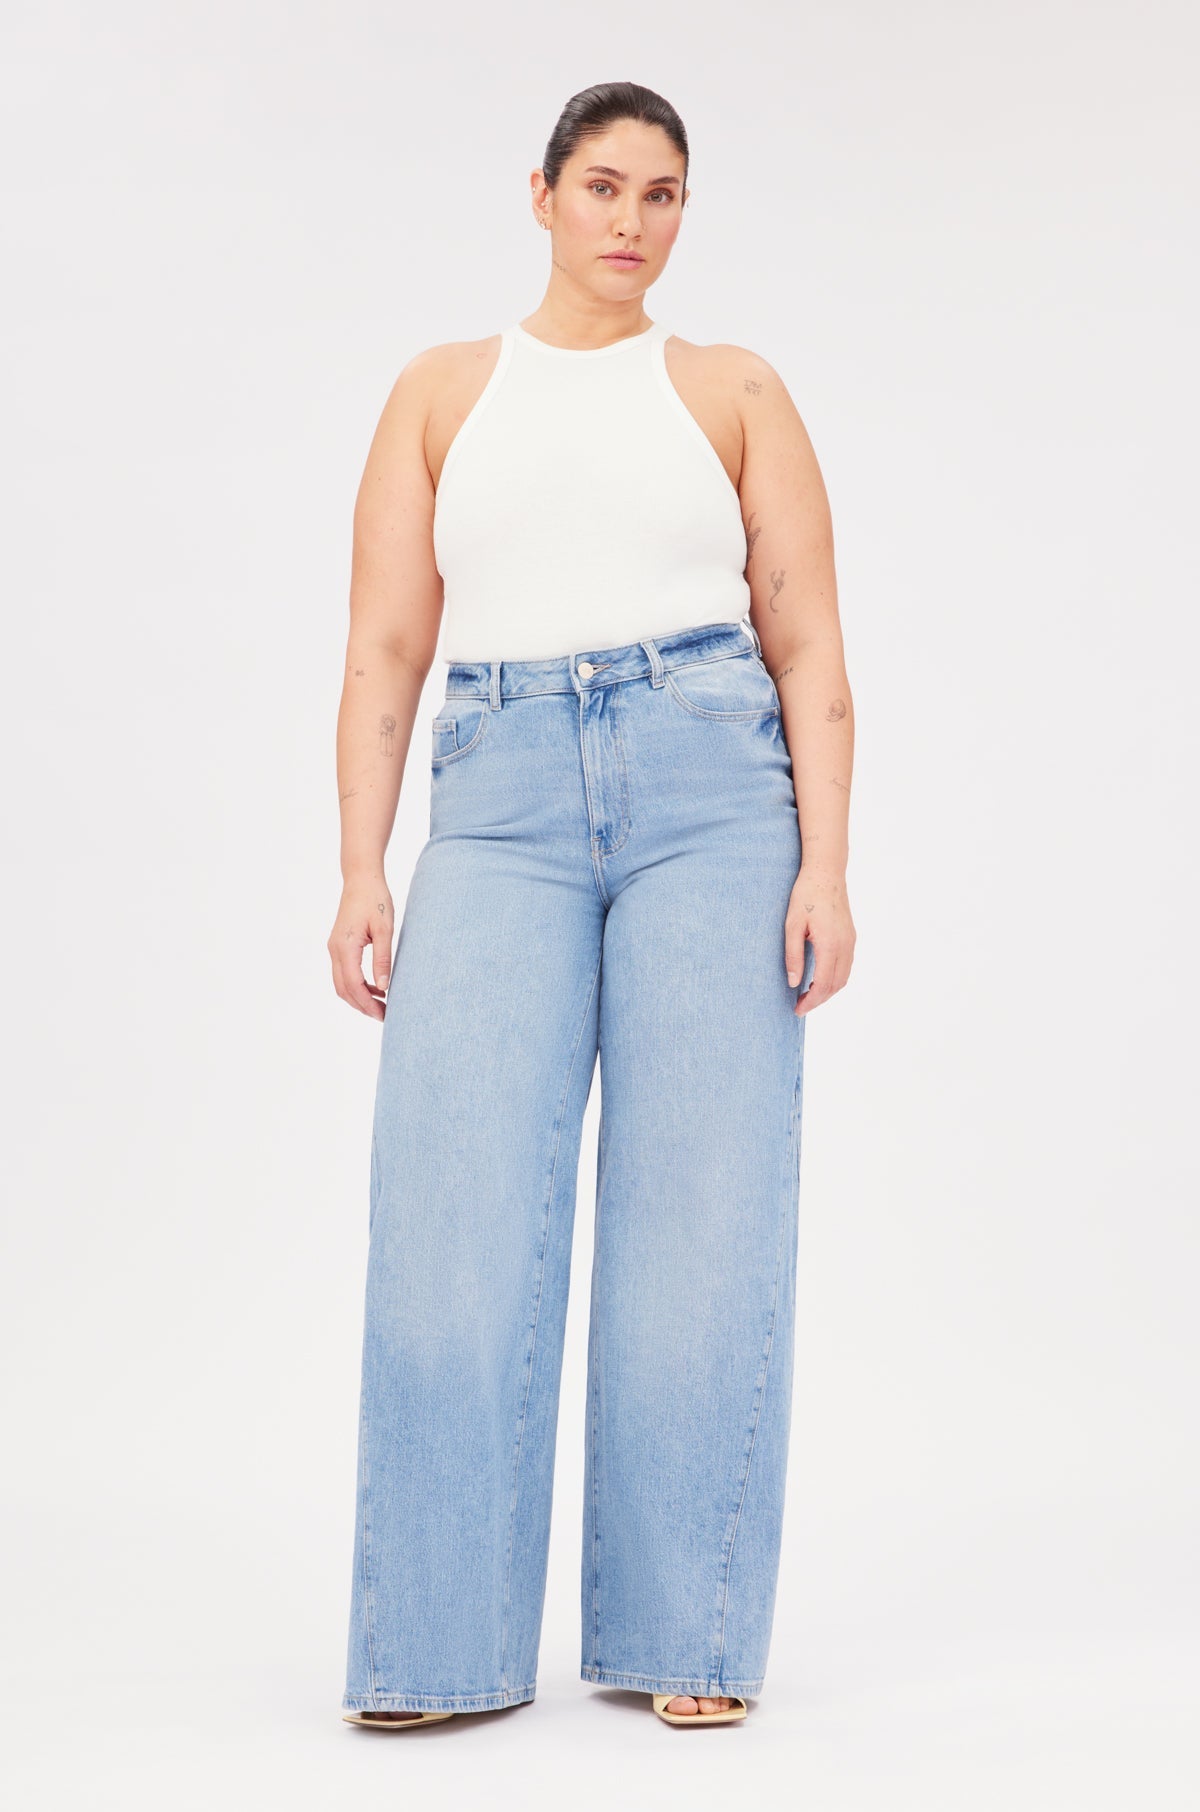 Buy Perfect Women's Loose Fit Jeans Online | Levi's India – Levis India  Store